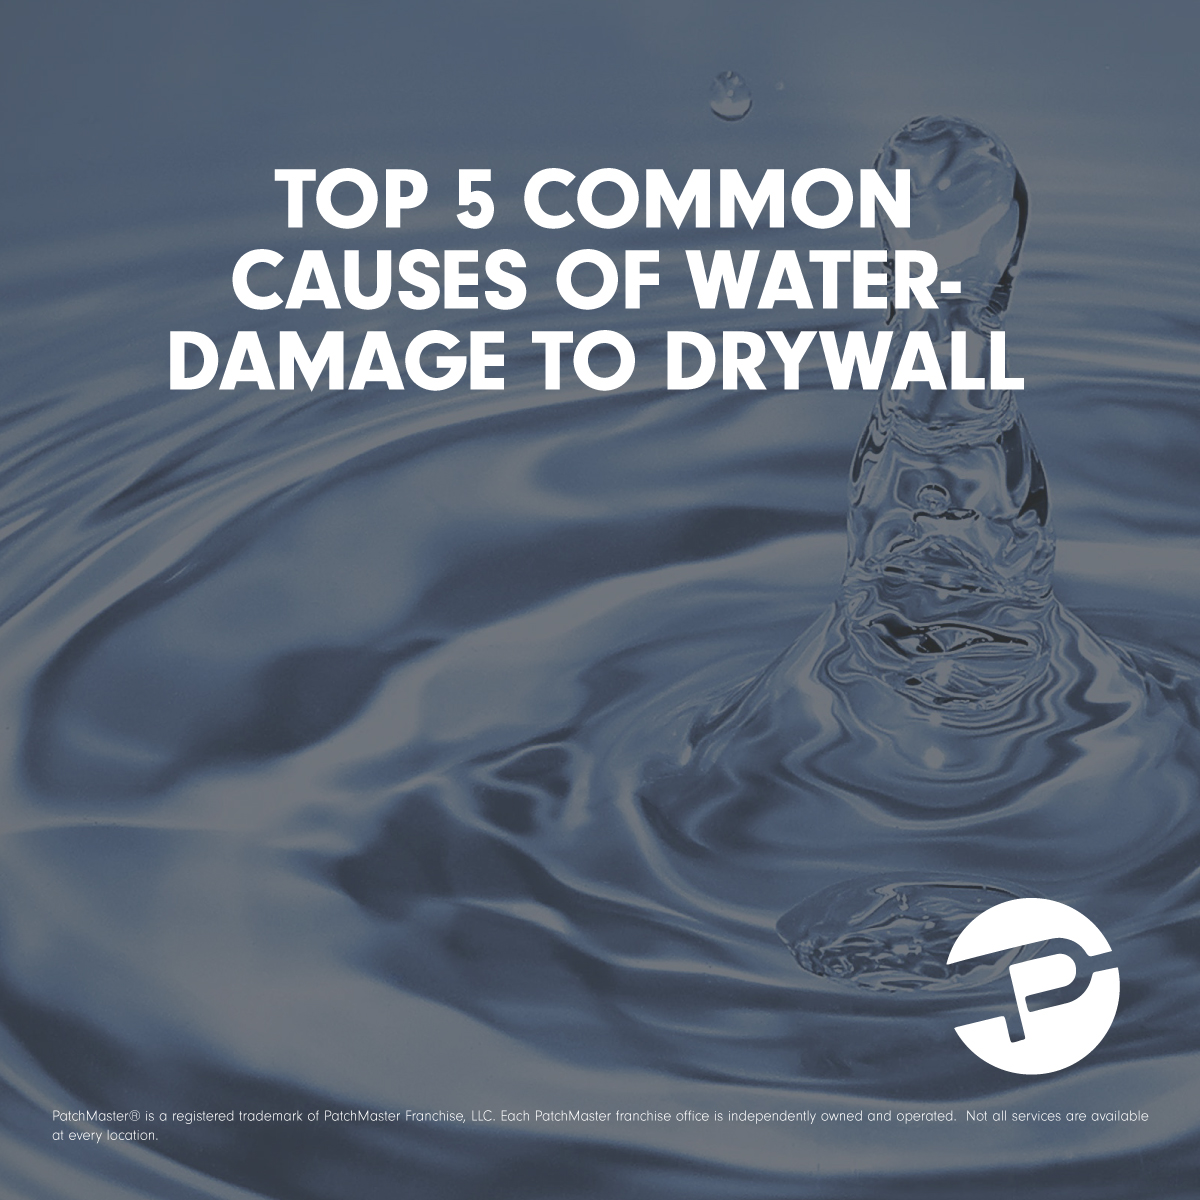 Top 5 Common Causes of Water Damage to Drywall